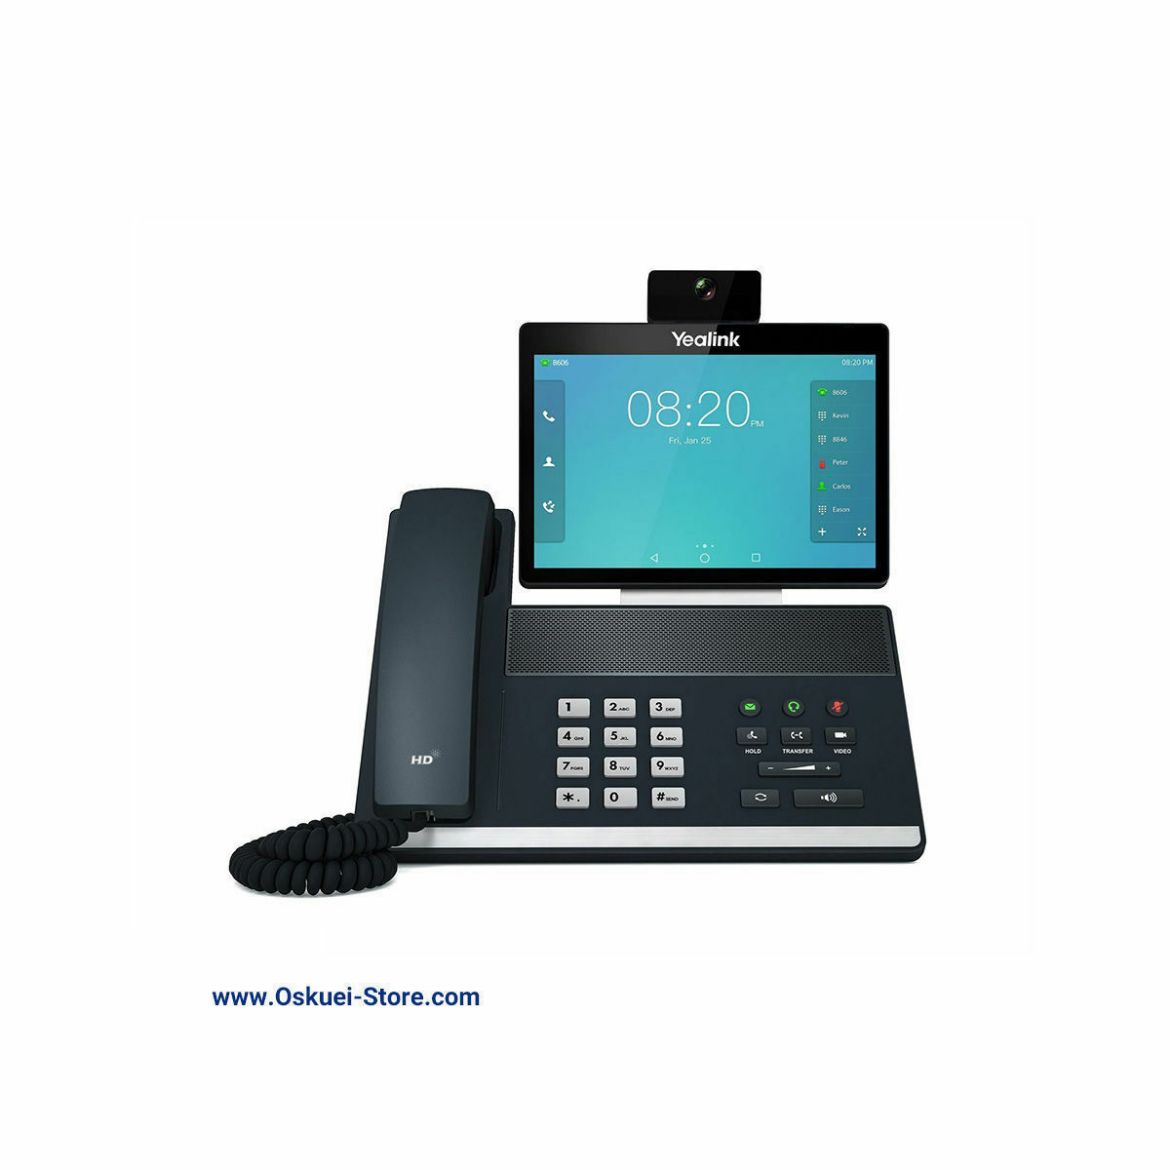 Yealink VP59 With Camera VoIP SIP Telephone Black Front